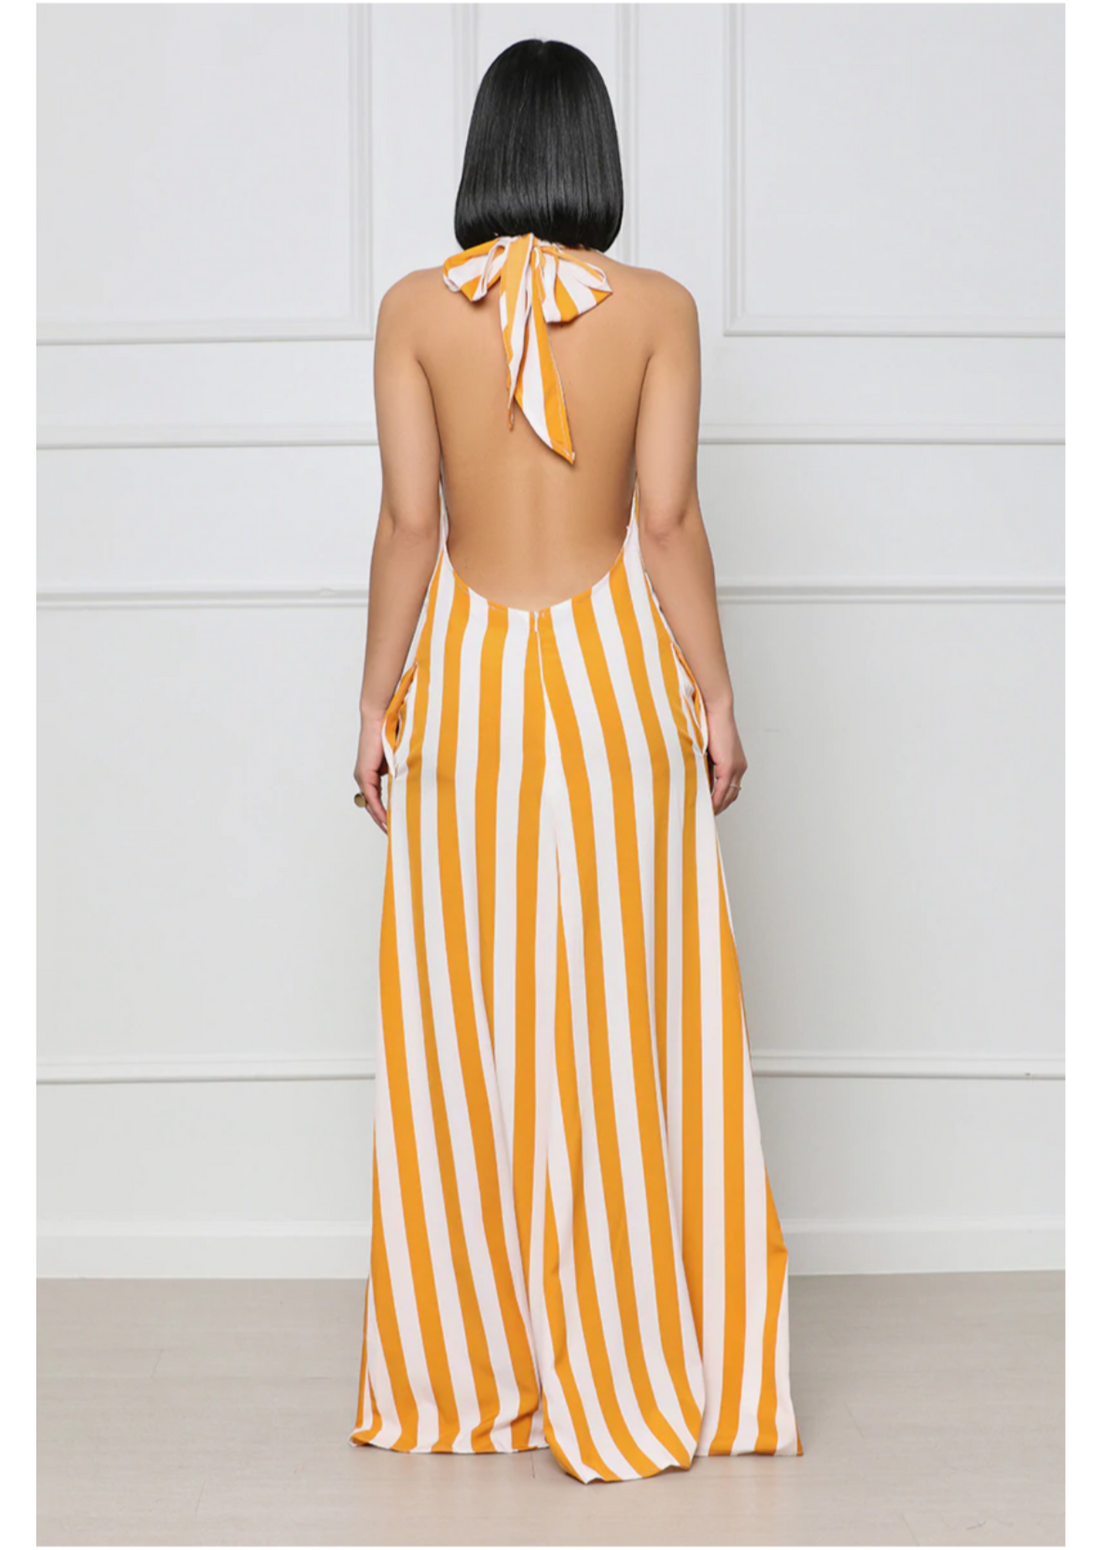 STRIPED HALTER MAXI DRESS WITH POCKET YELLOW